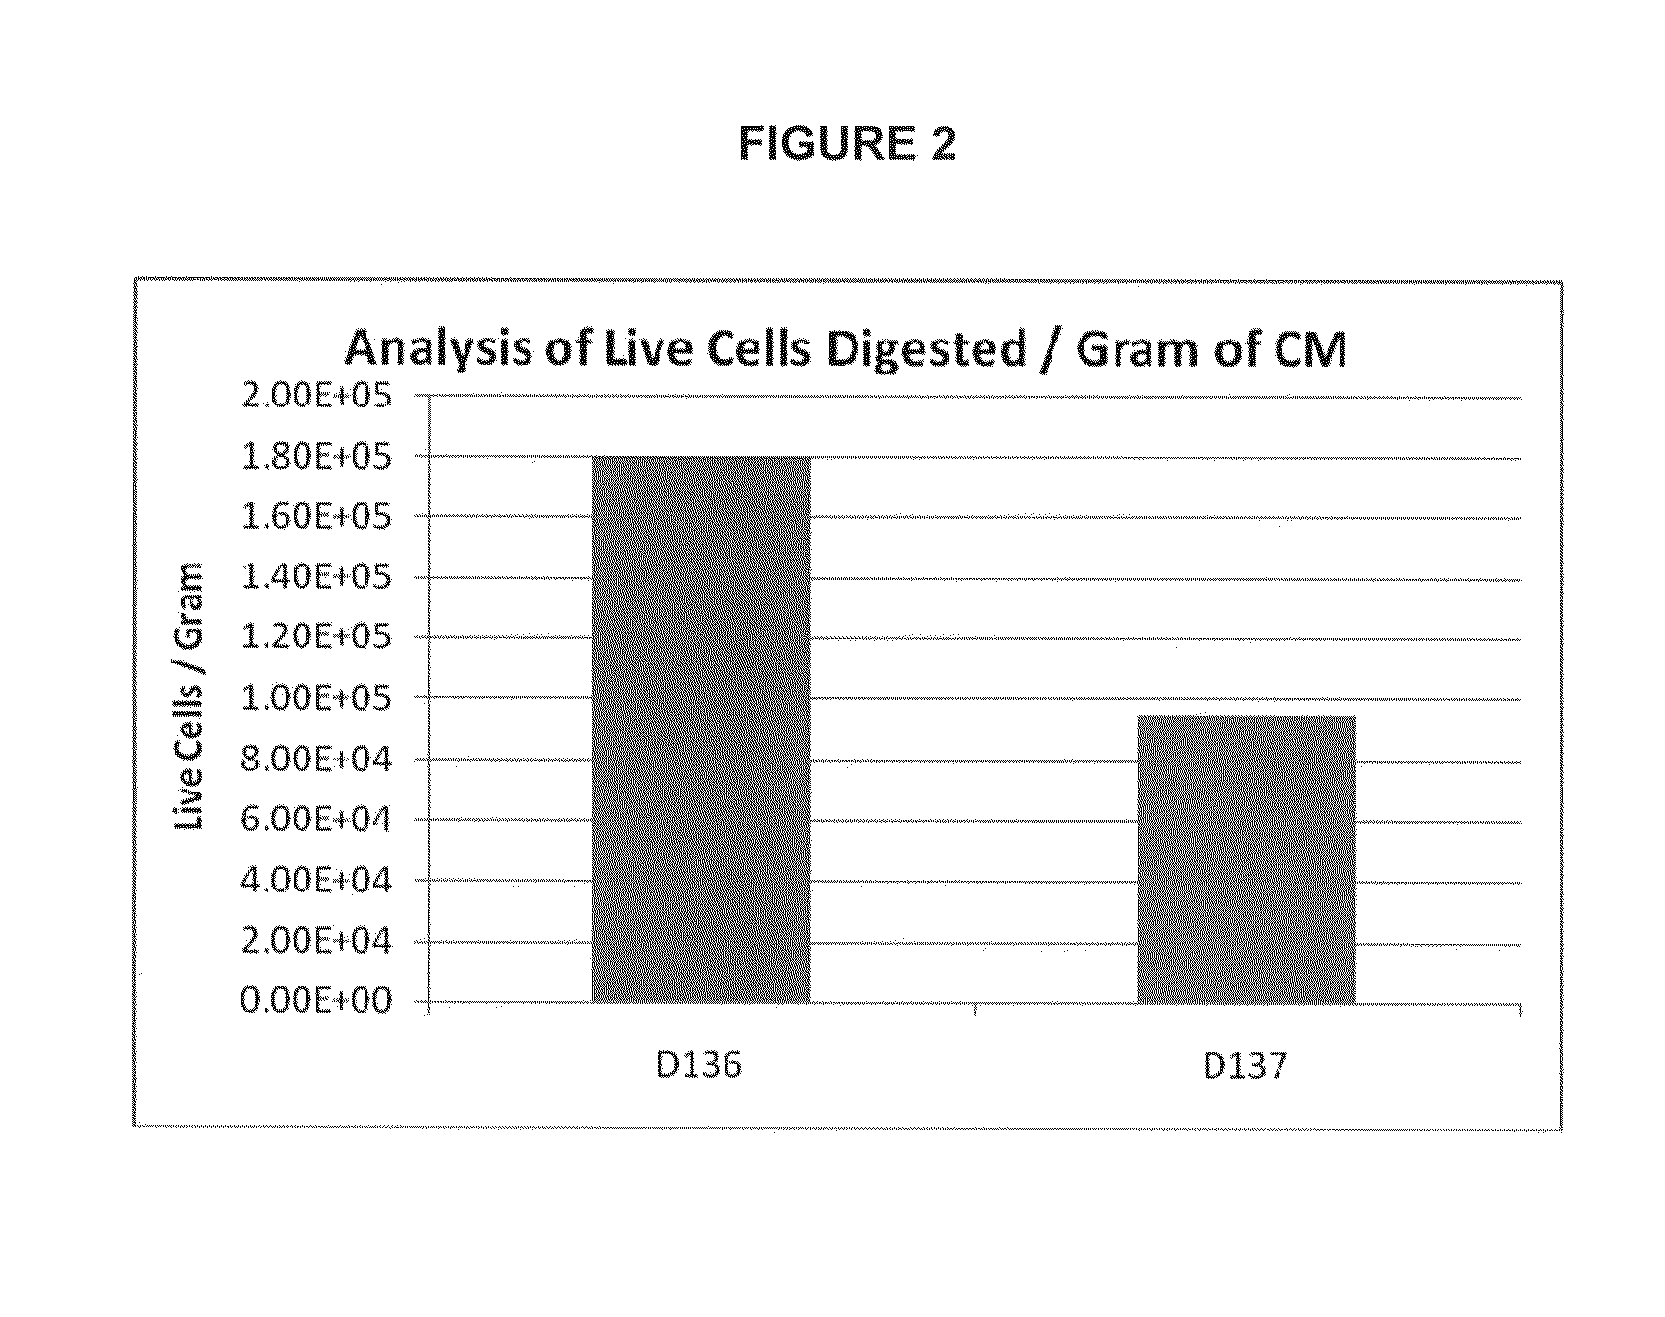 Therapeutic products comprising vitalized placental dispersions